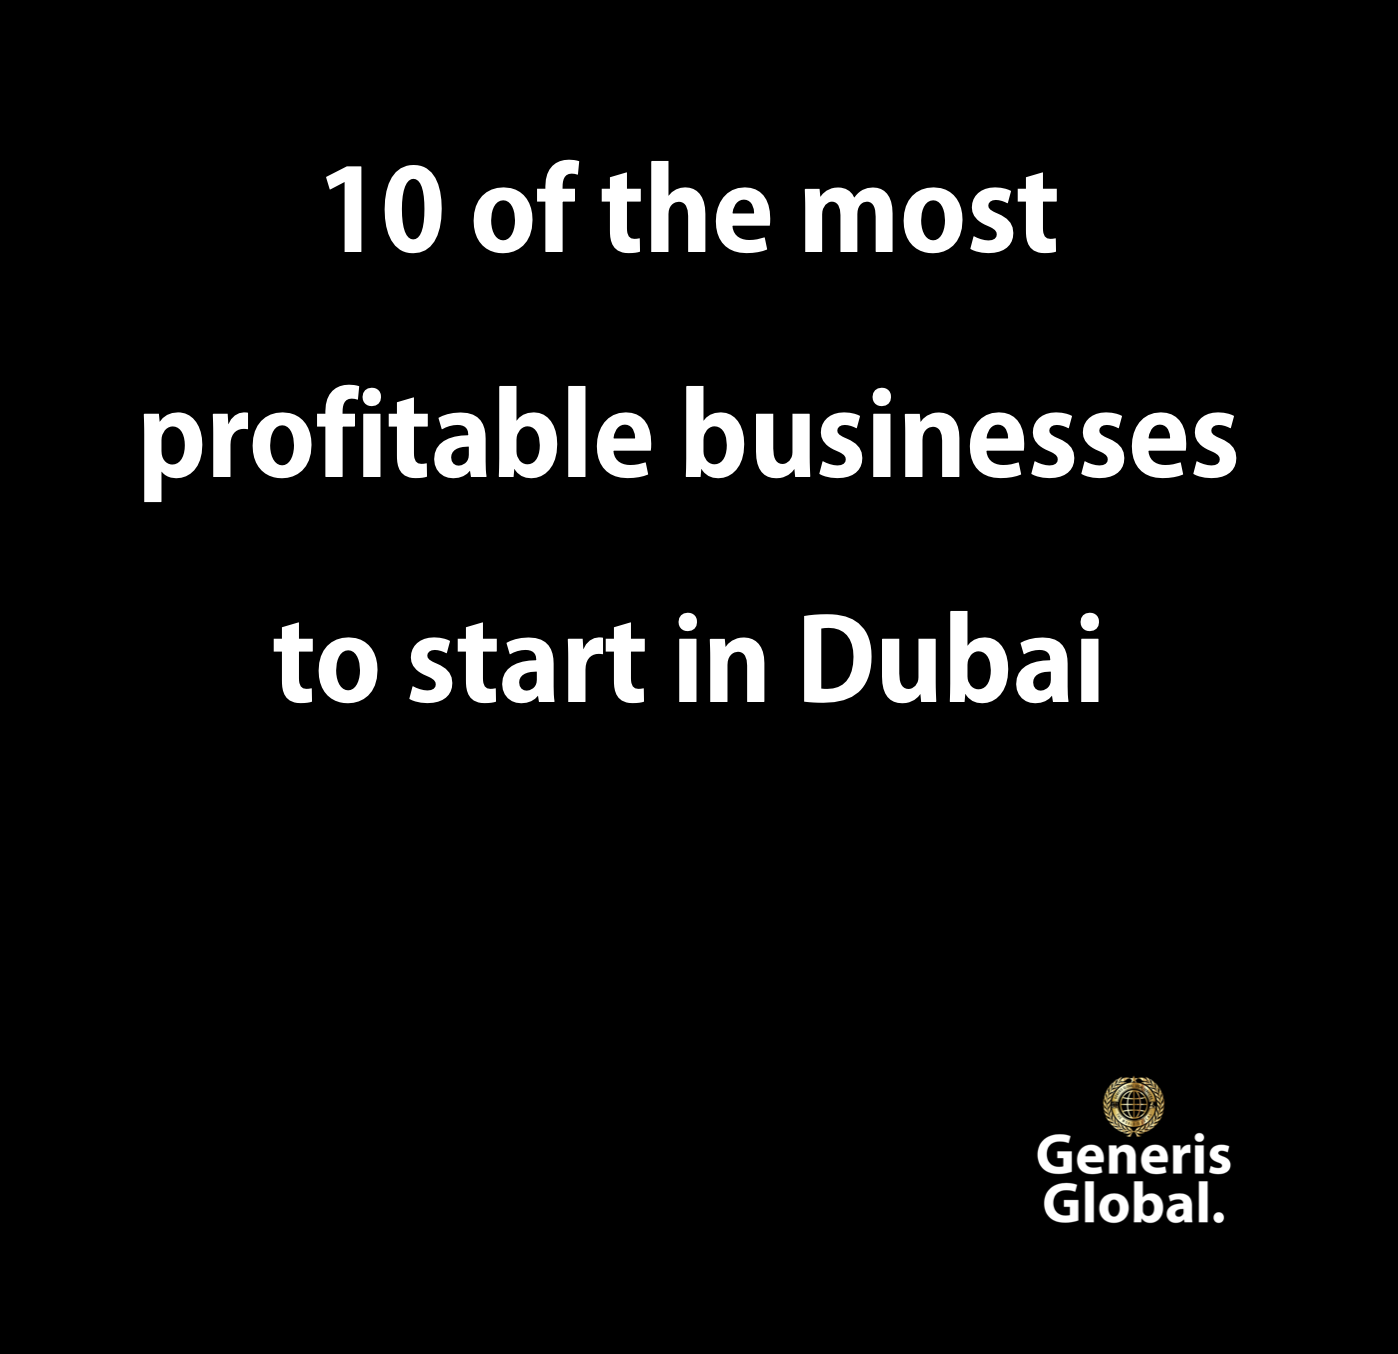 10 of the most profitable businesses to start in Dubai